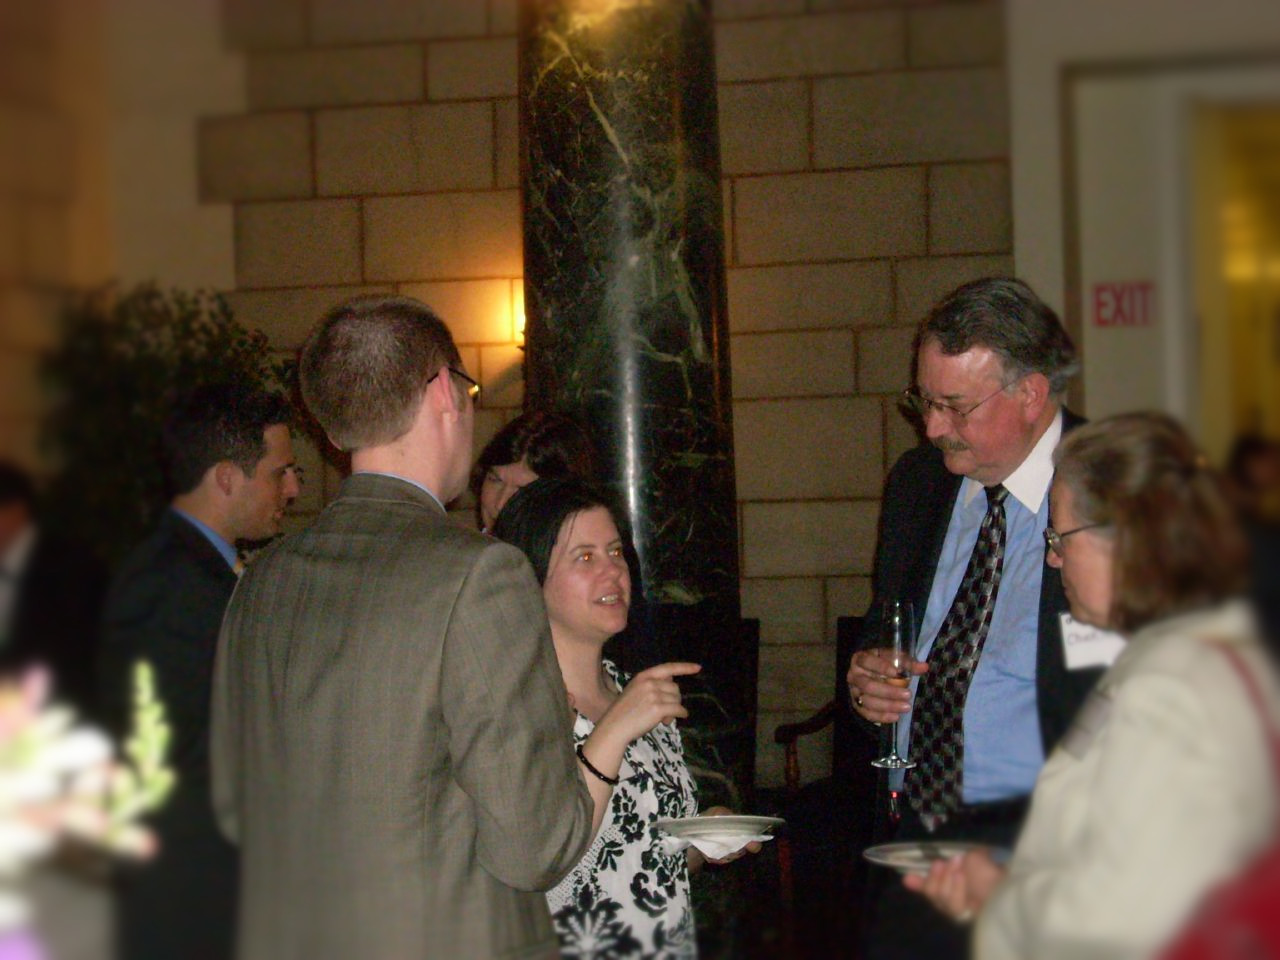 Two women and two men talk and gesture with plates and drink glasses during a business reception